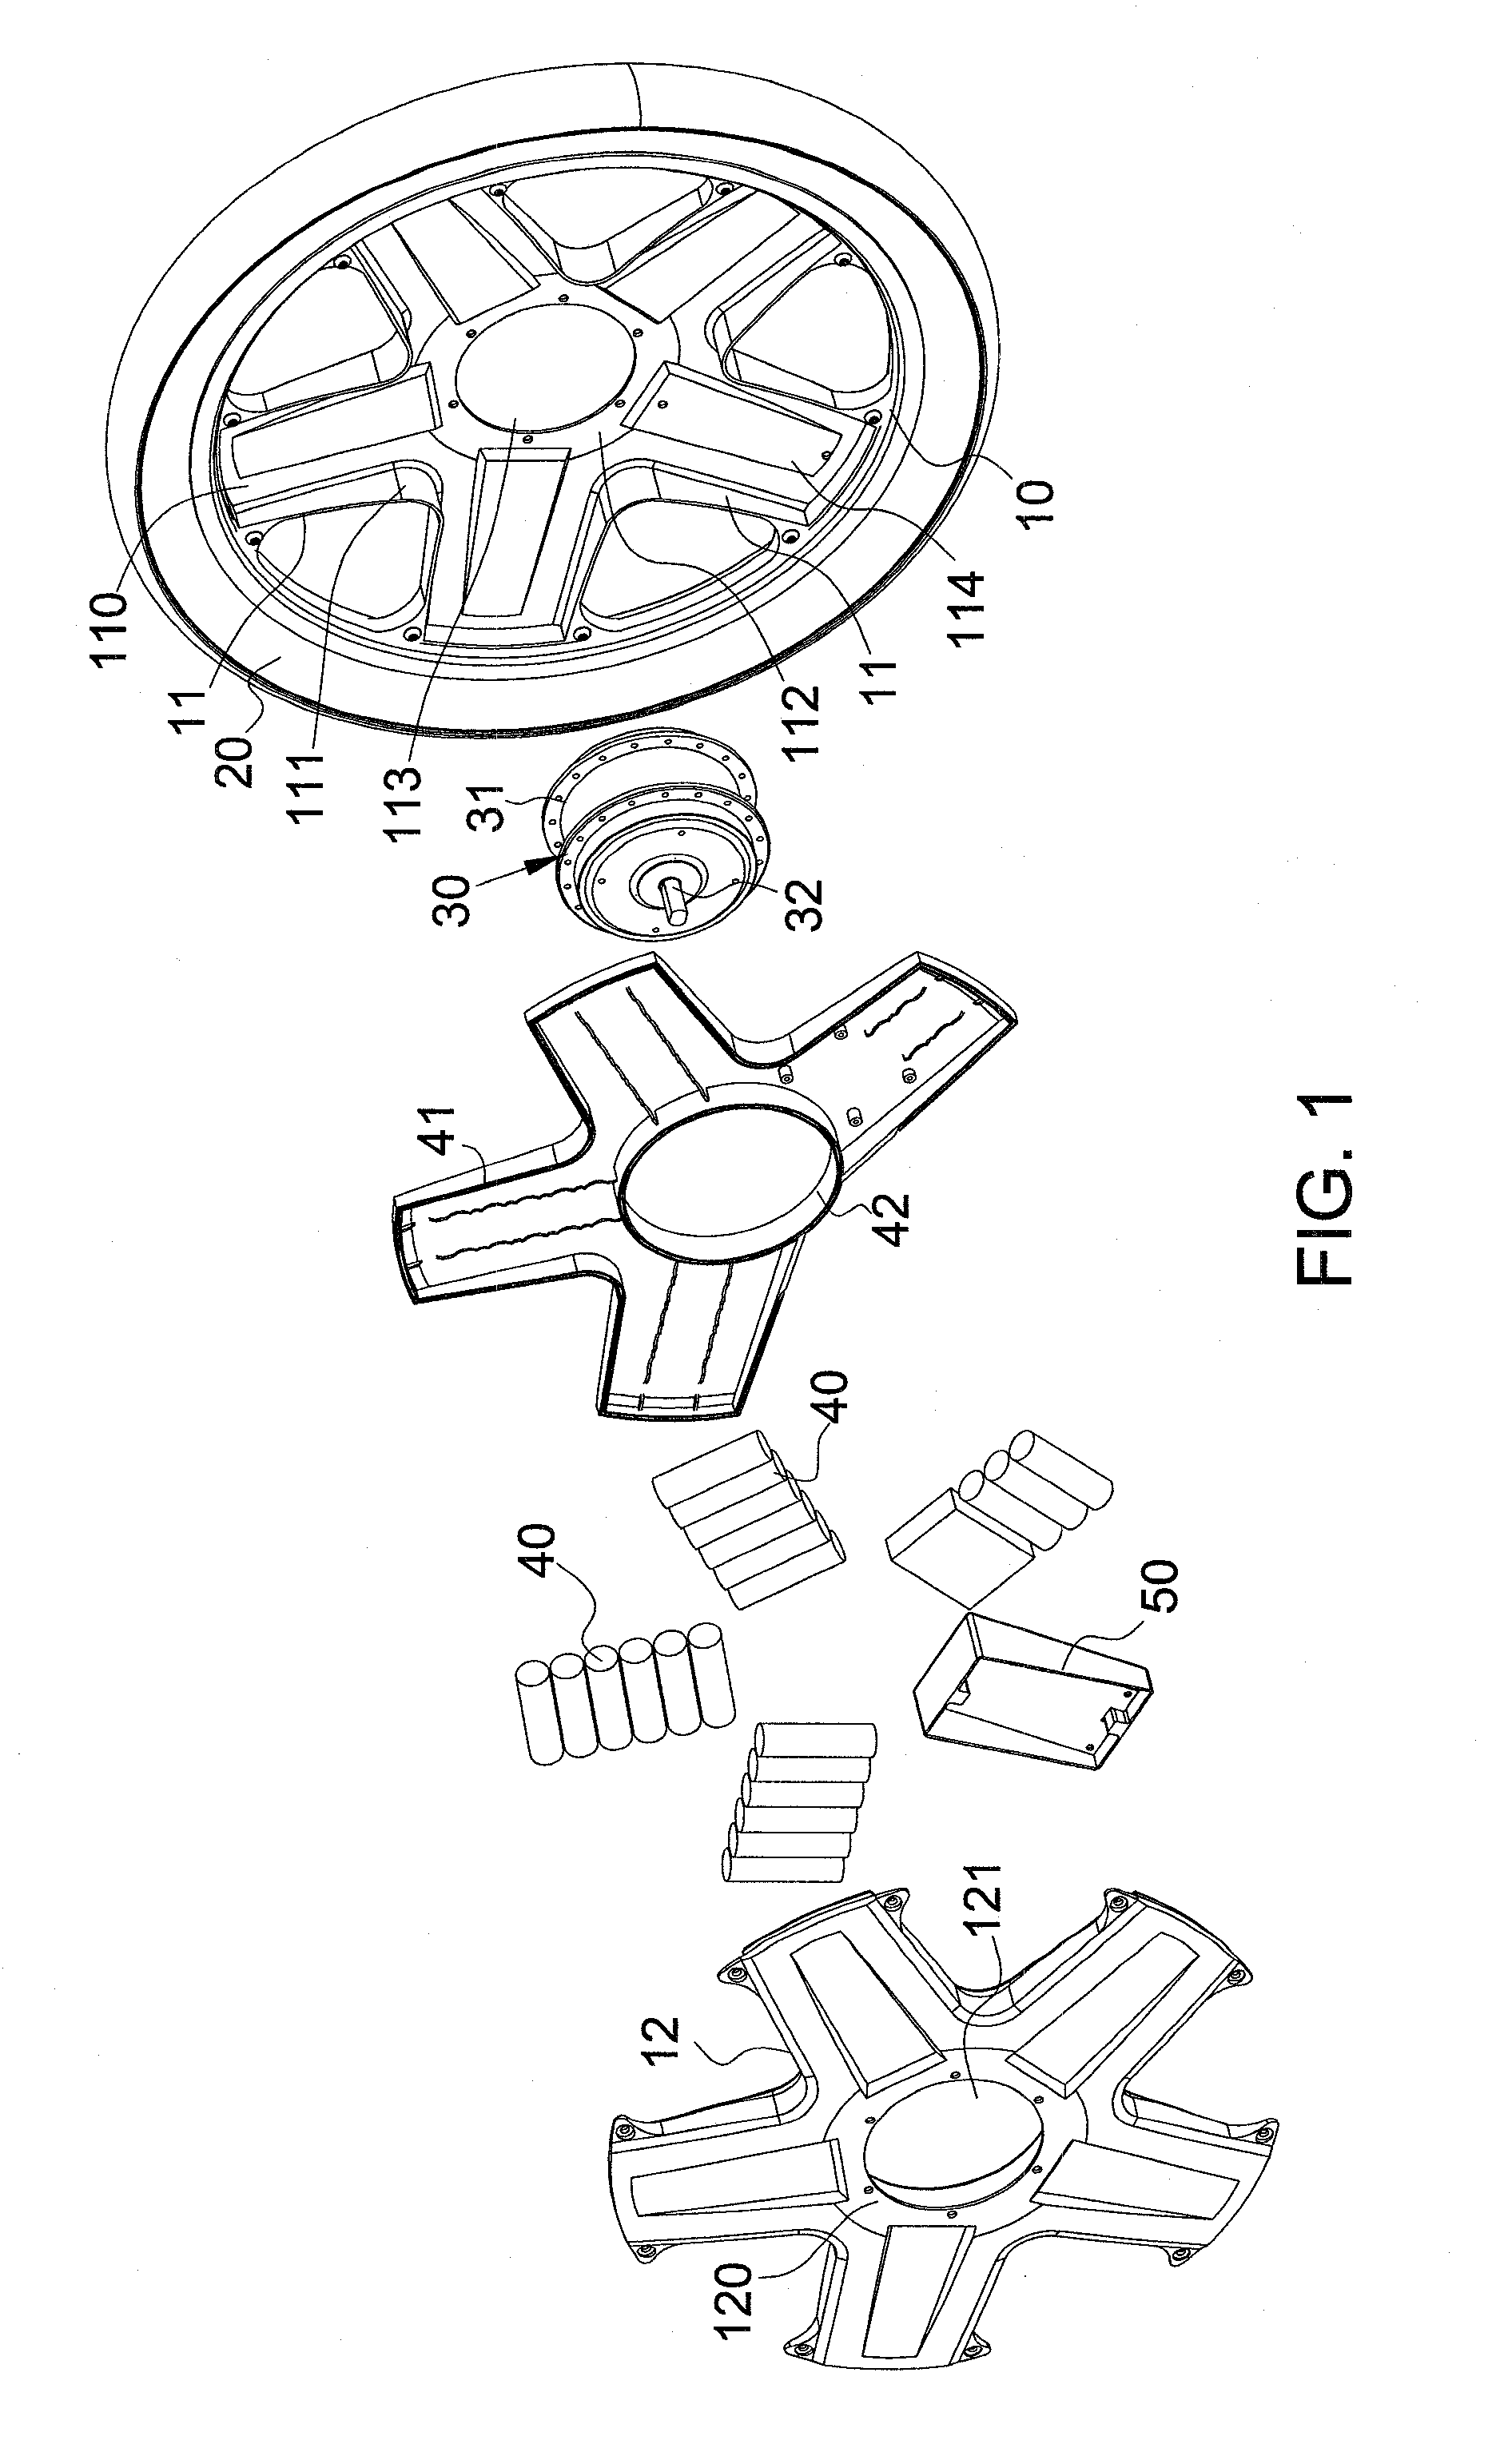 Electric wheel for electric vehicles